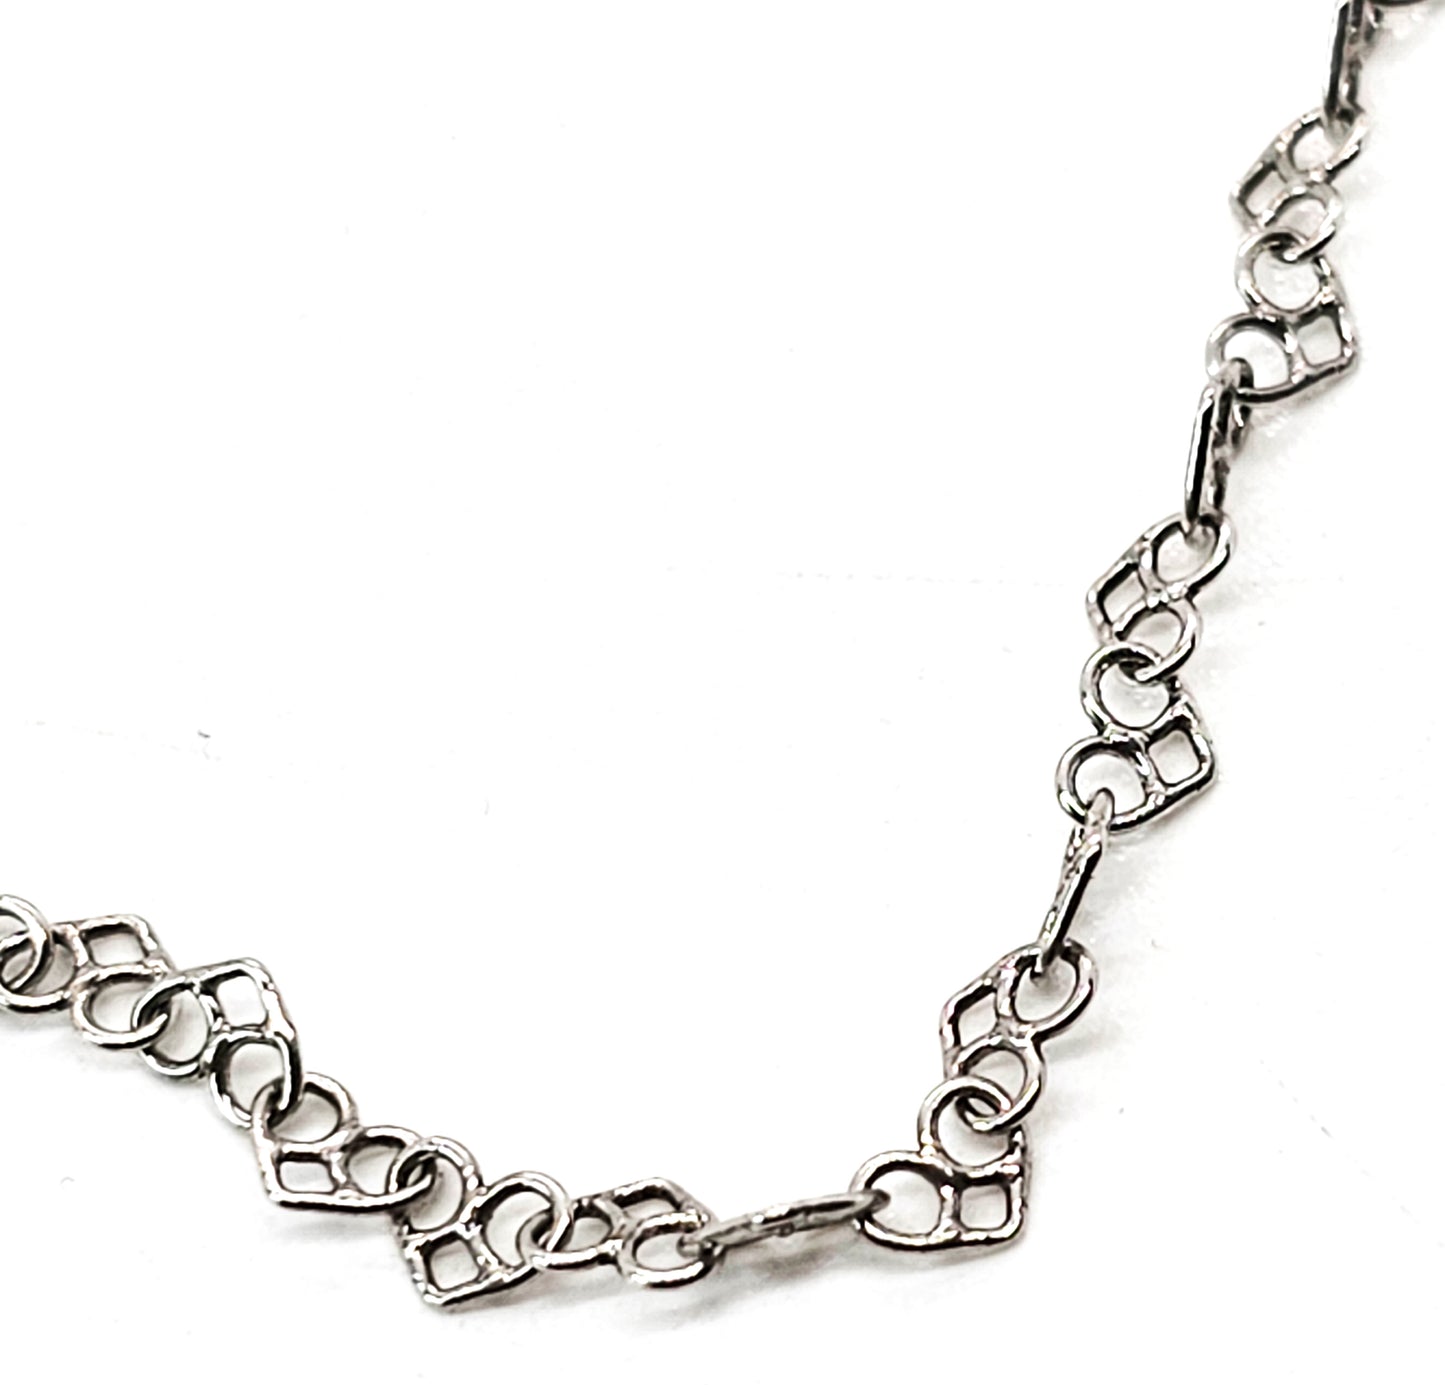 Heart link chain open work sterling silver 17 inch necklace